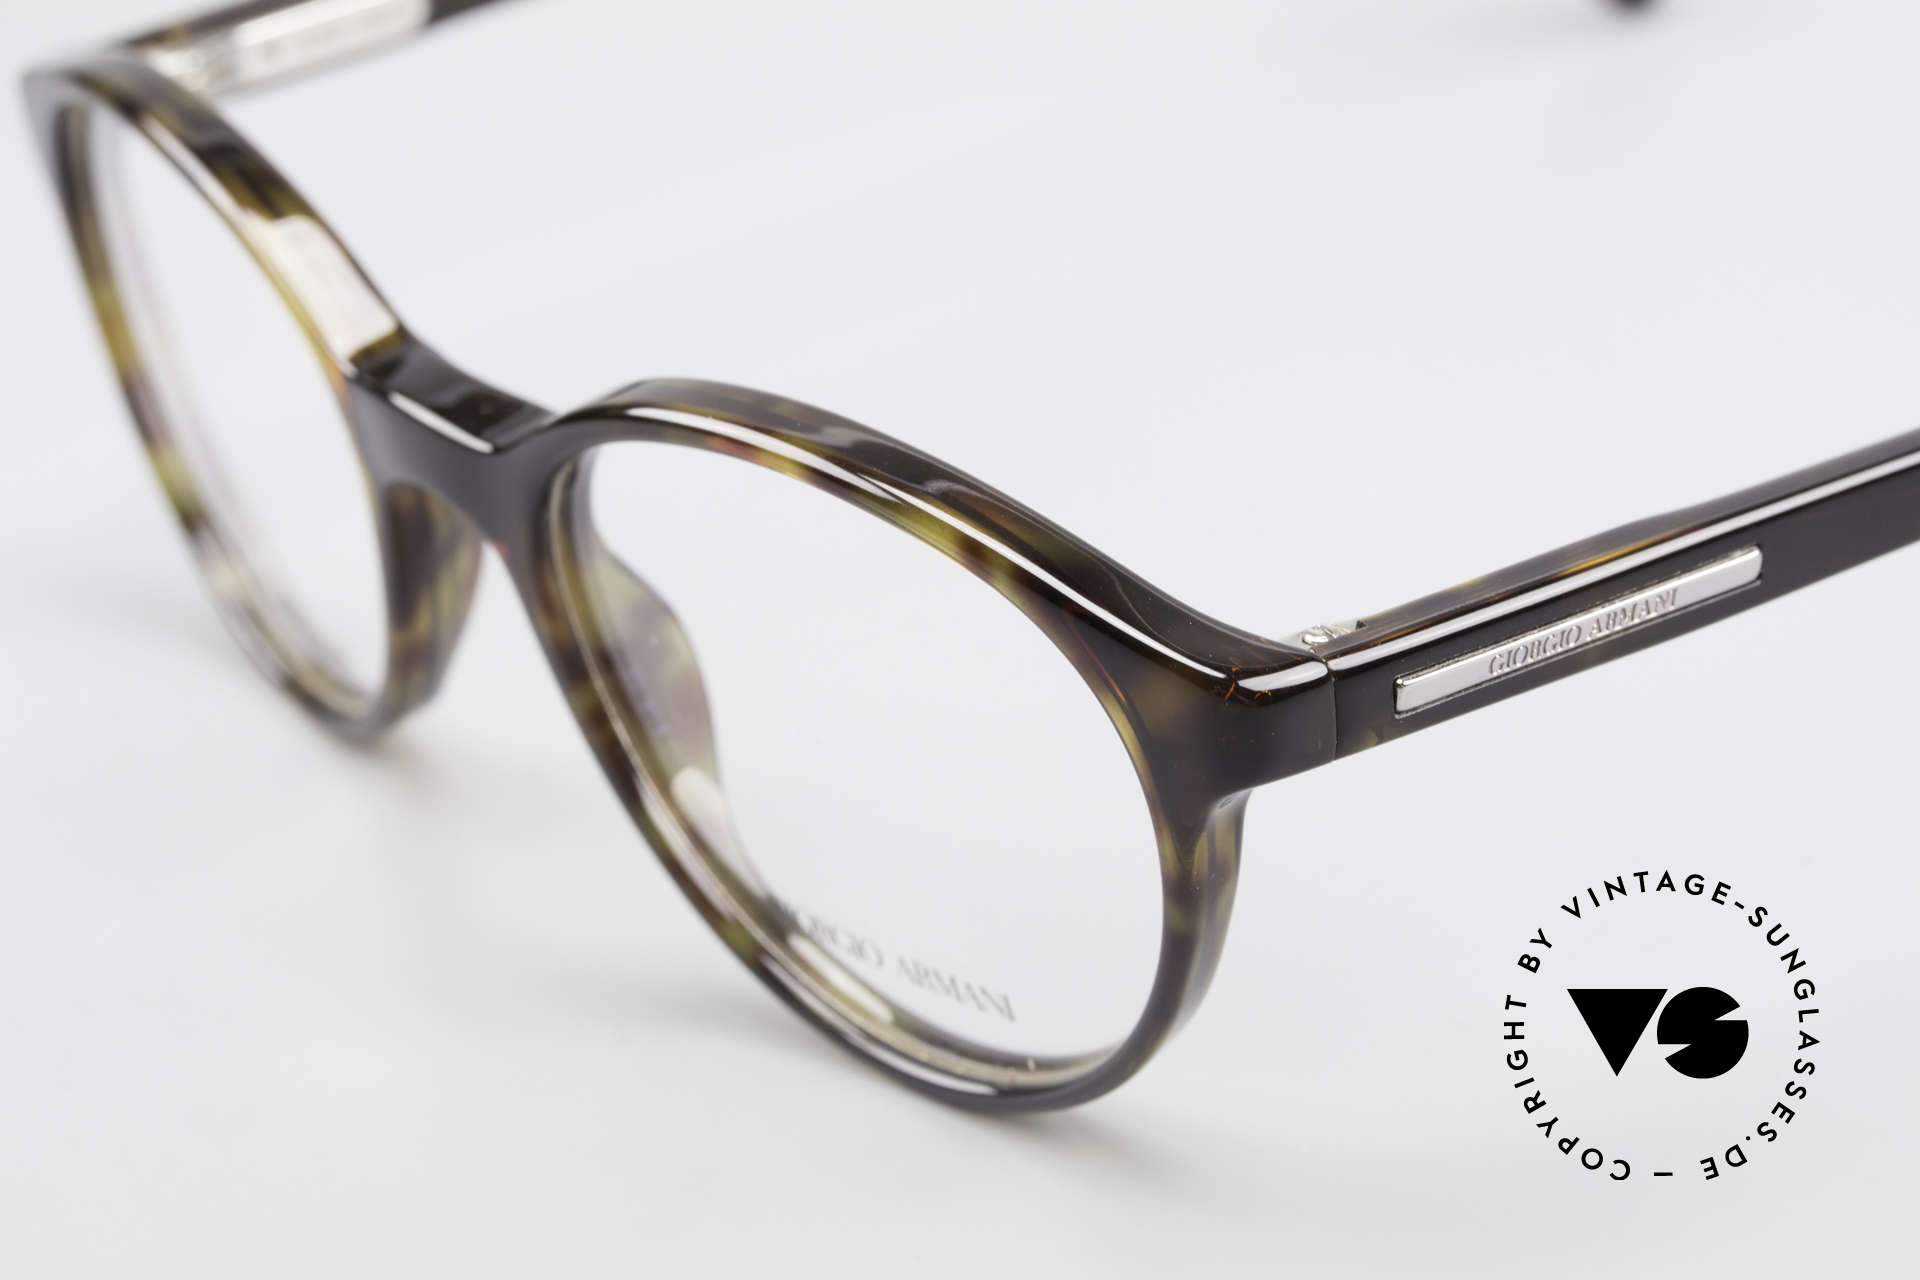 Giorgio Armani 467 Unisex Panto Eyeglass-Frame, frame is made for lenses of any kind (optical/sun), Made for Men and Women